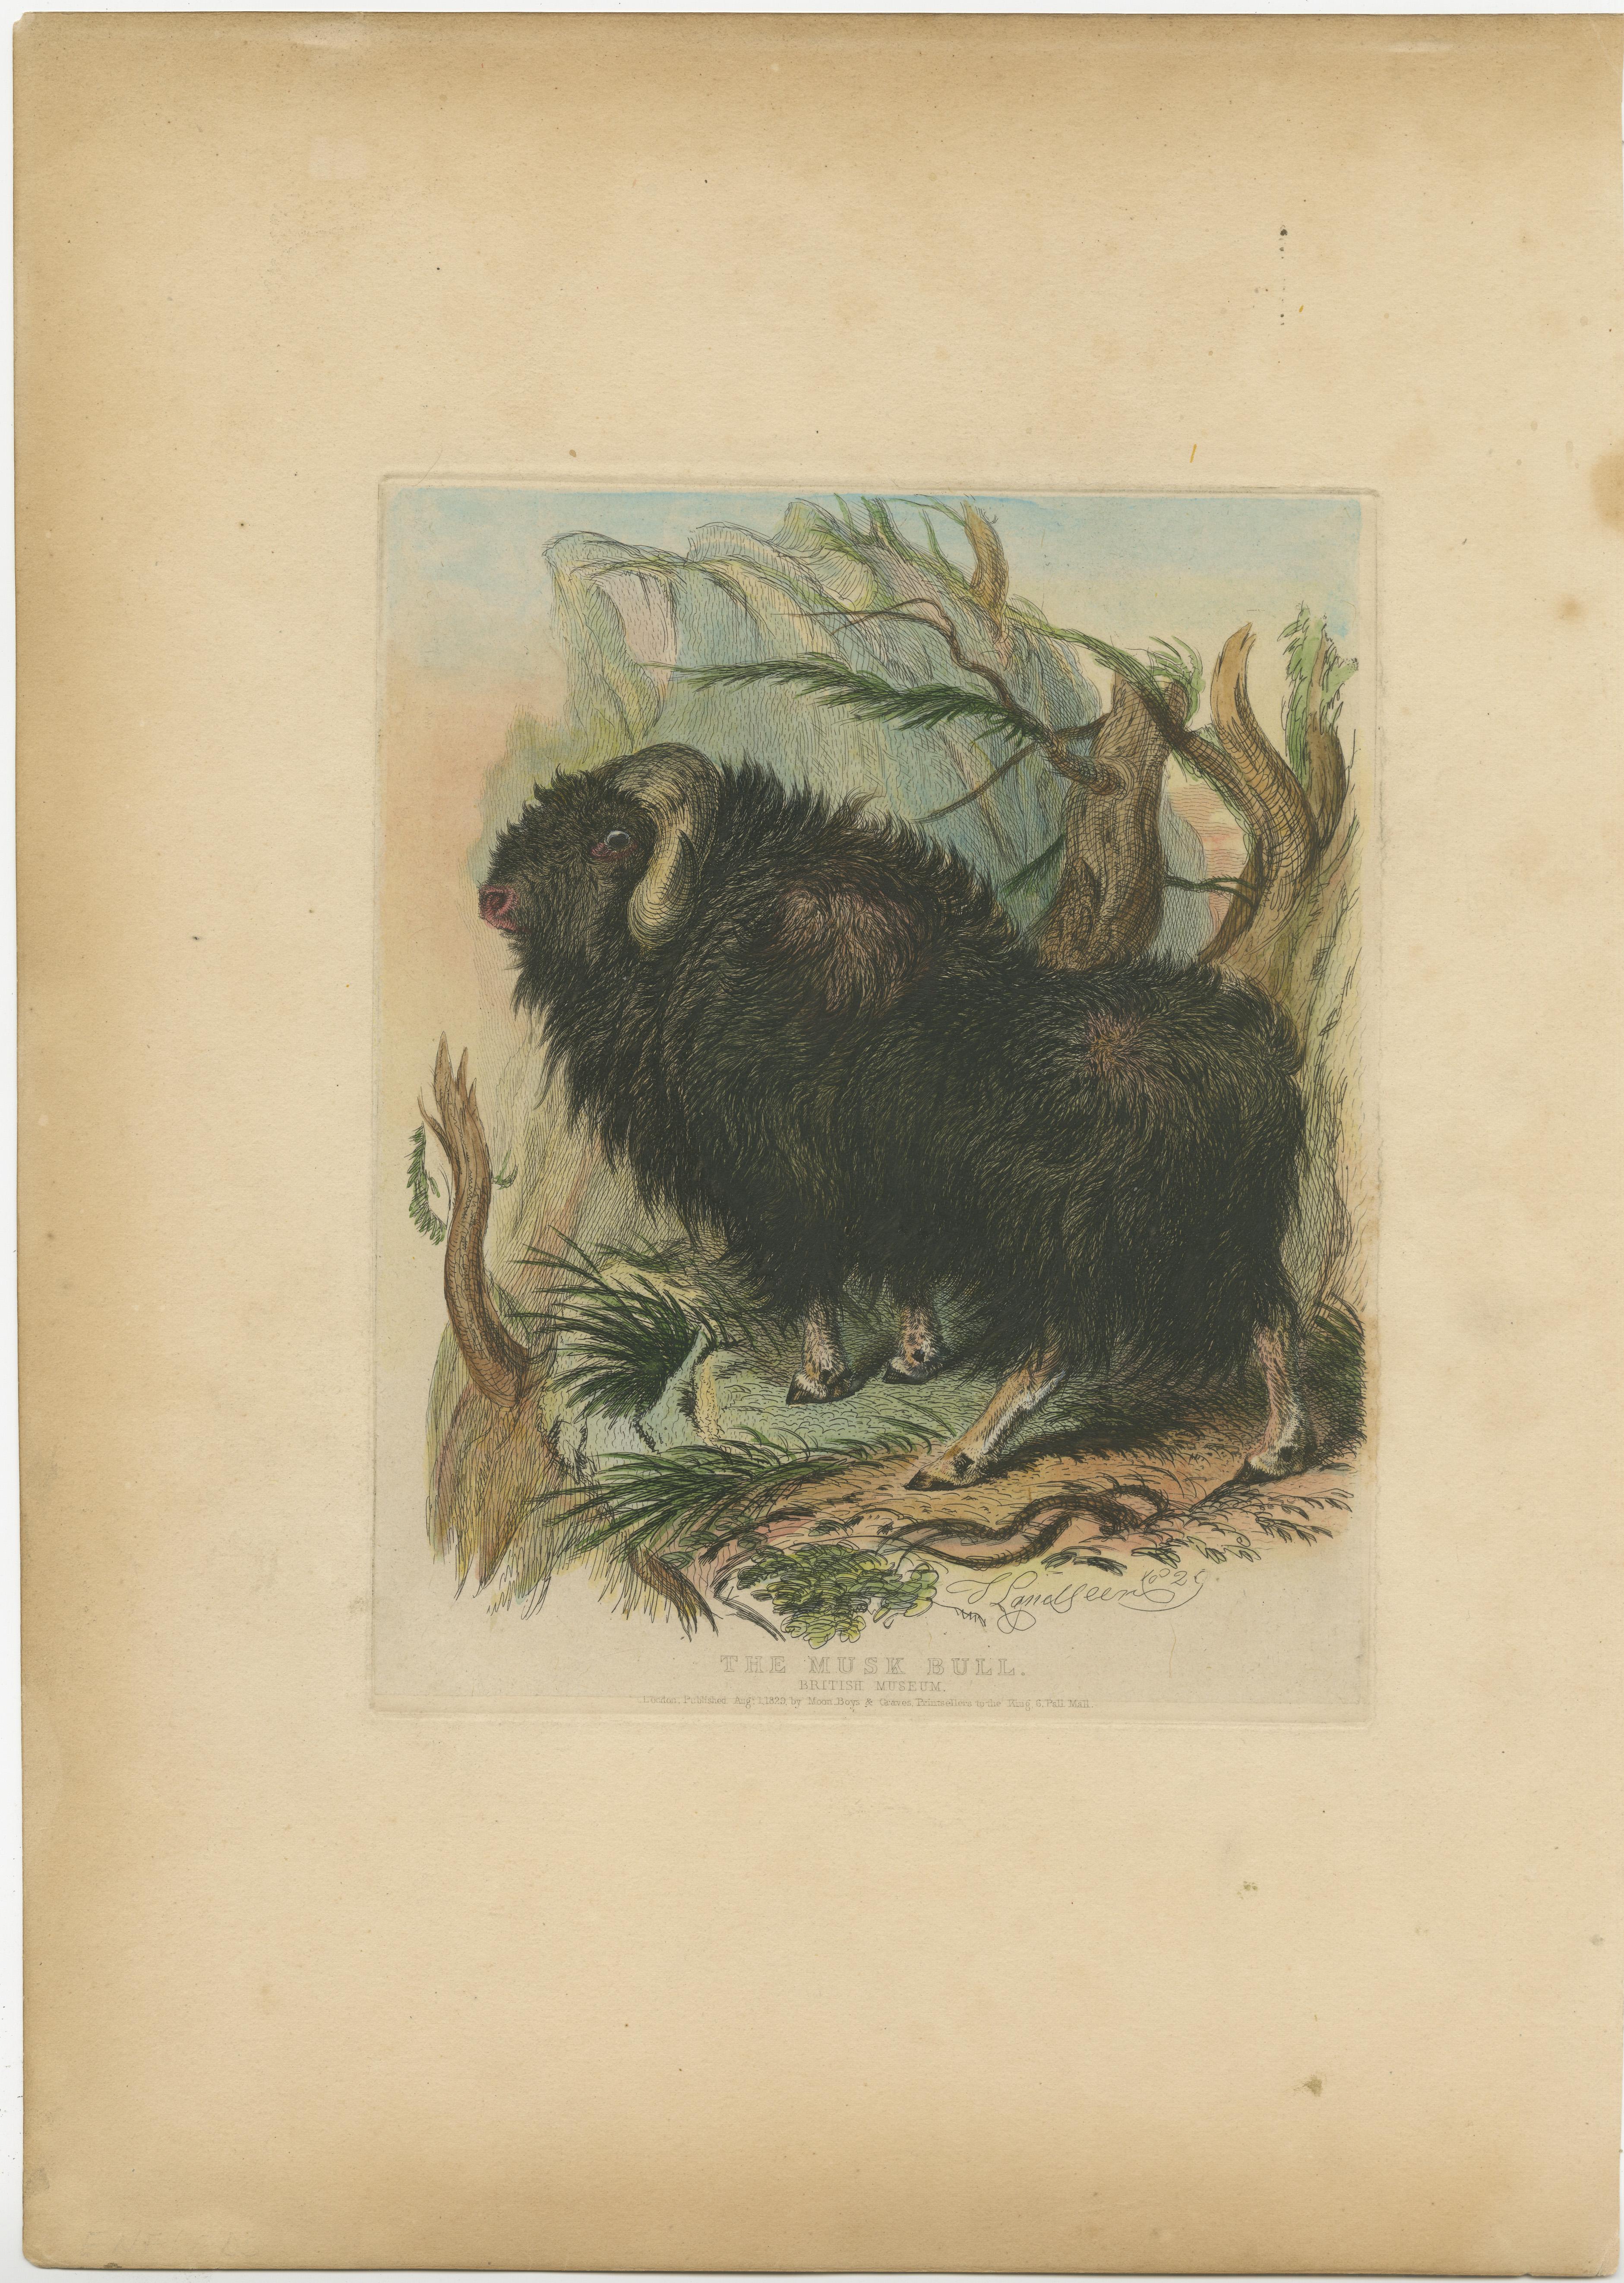 Antique print titled 'The Musk Bull'. Original old print of a muskox, also spelled musk ox and musk-ox. This print originates from the series 'Characteristic sketches of animals, principally from the Zoological Gardens, Regent's Park' published